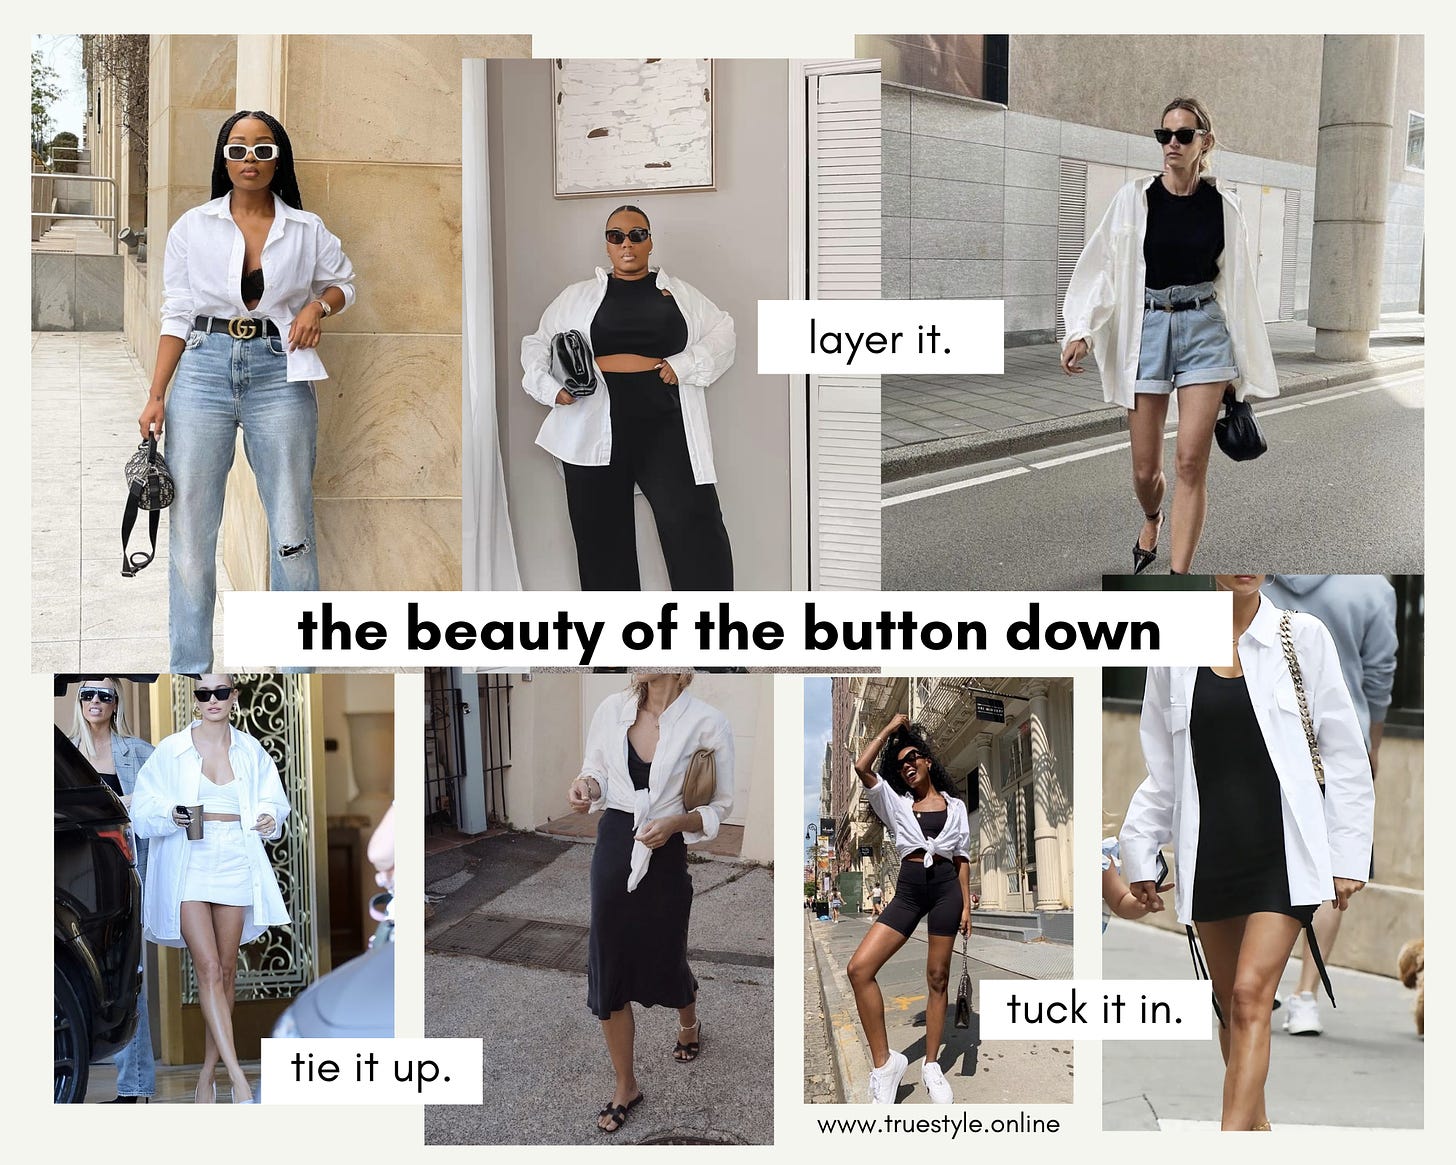 Collage of seven women with different casual outfits on all styled with a white button down over top with title "The Beauty of the Button Down" and the captions "layer it," "tie it up," and "tuck it in."